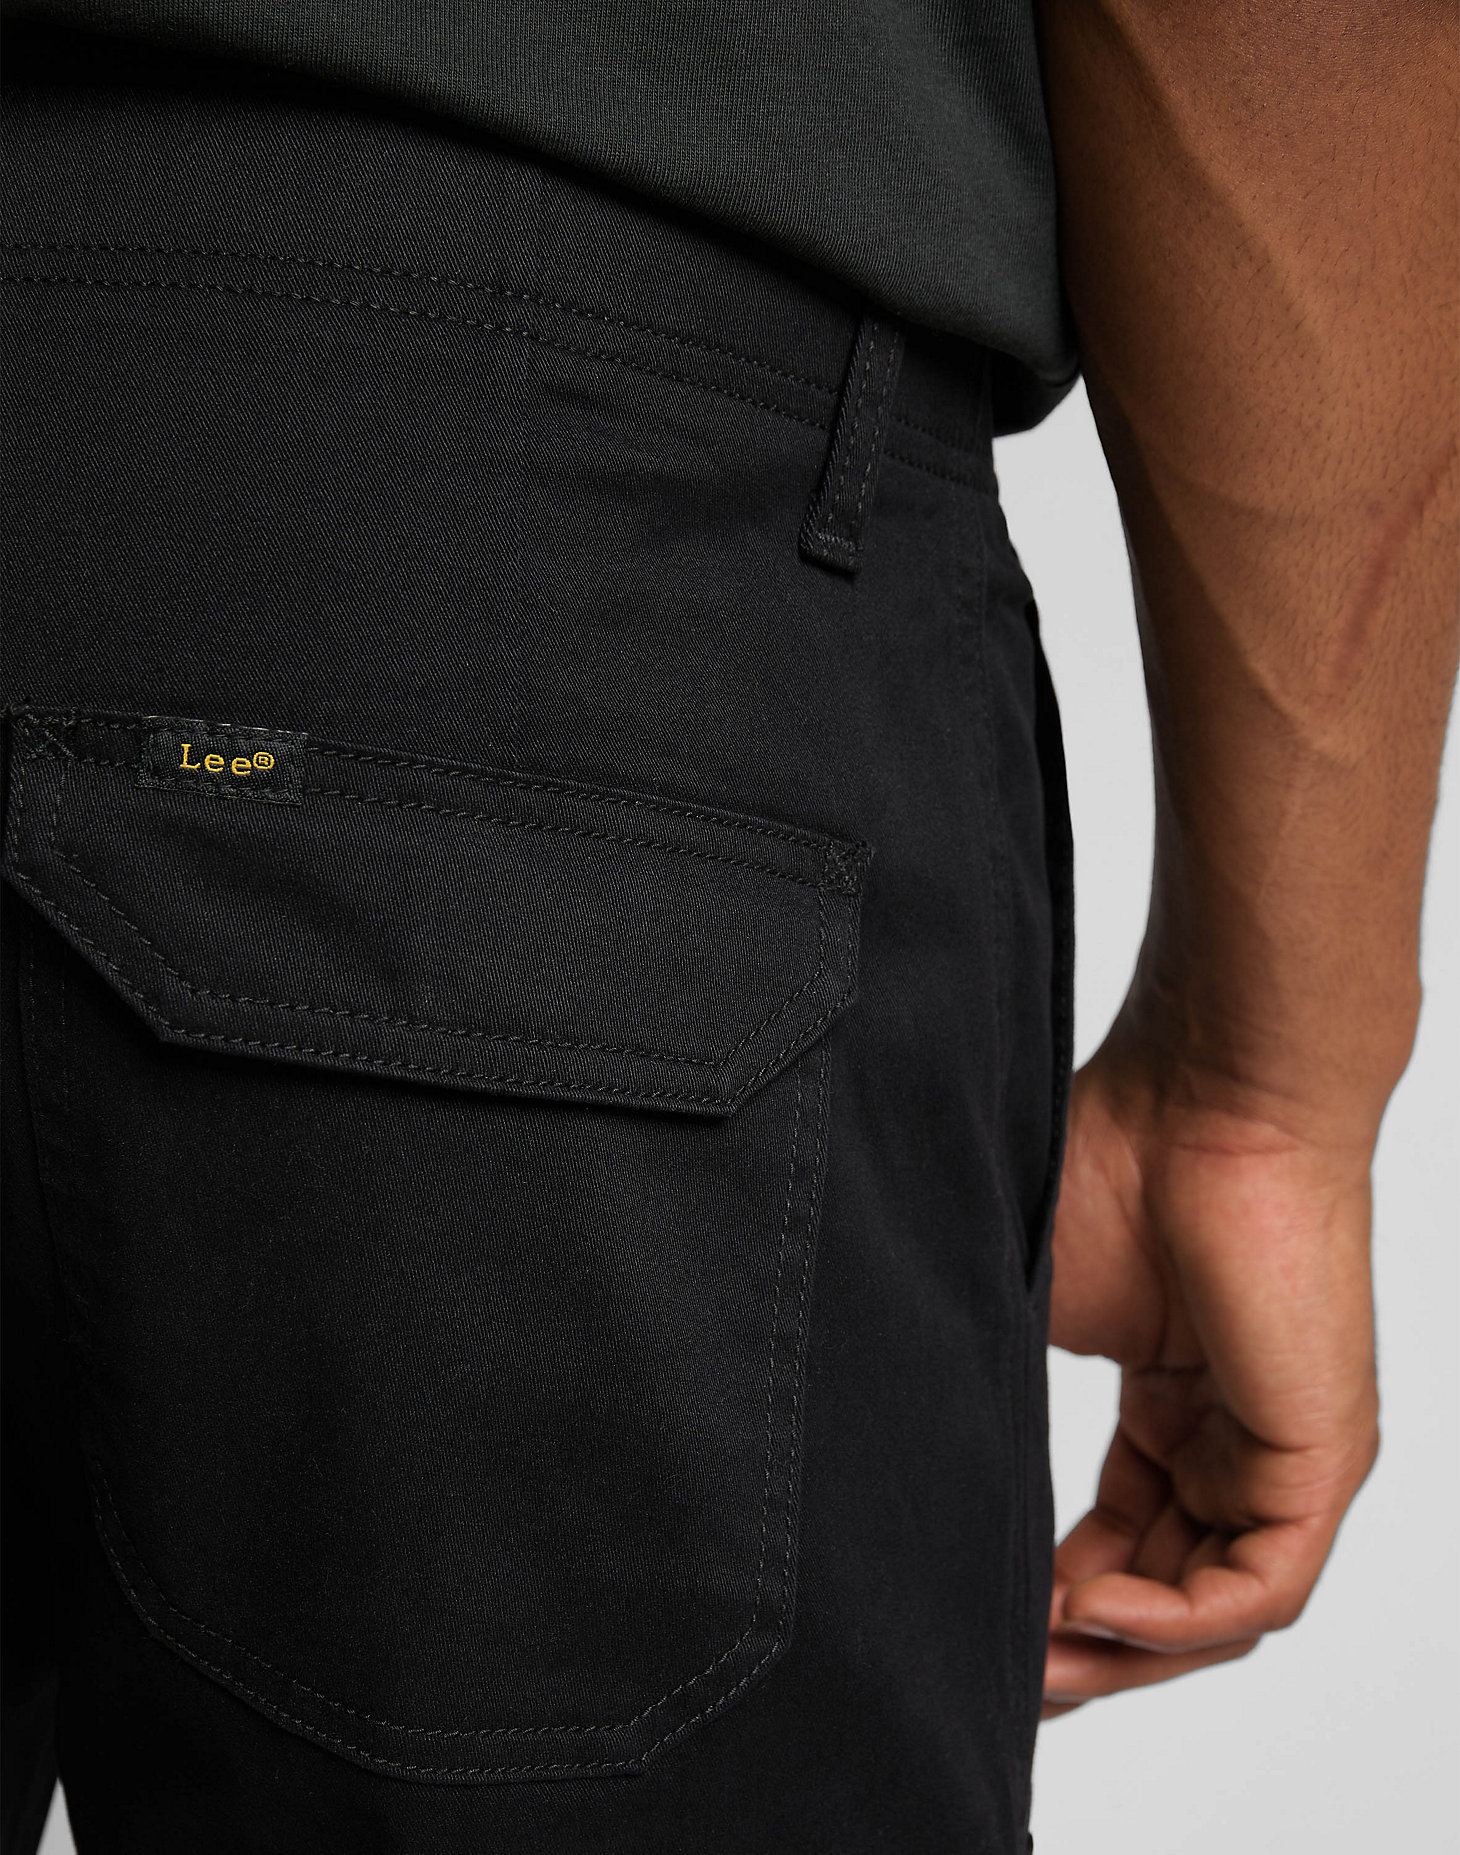 Cargo Pant Xc in Union All Black alternative view 4